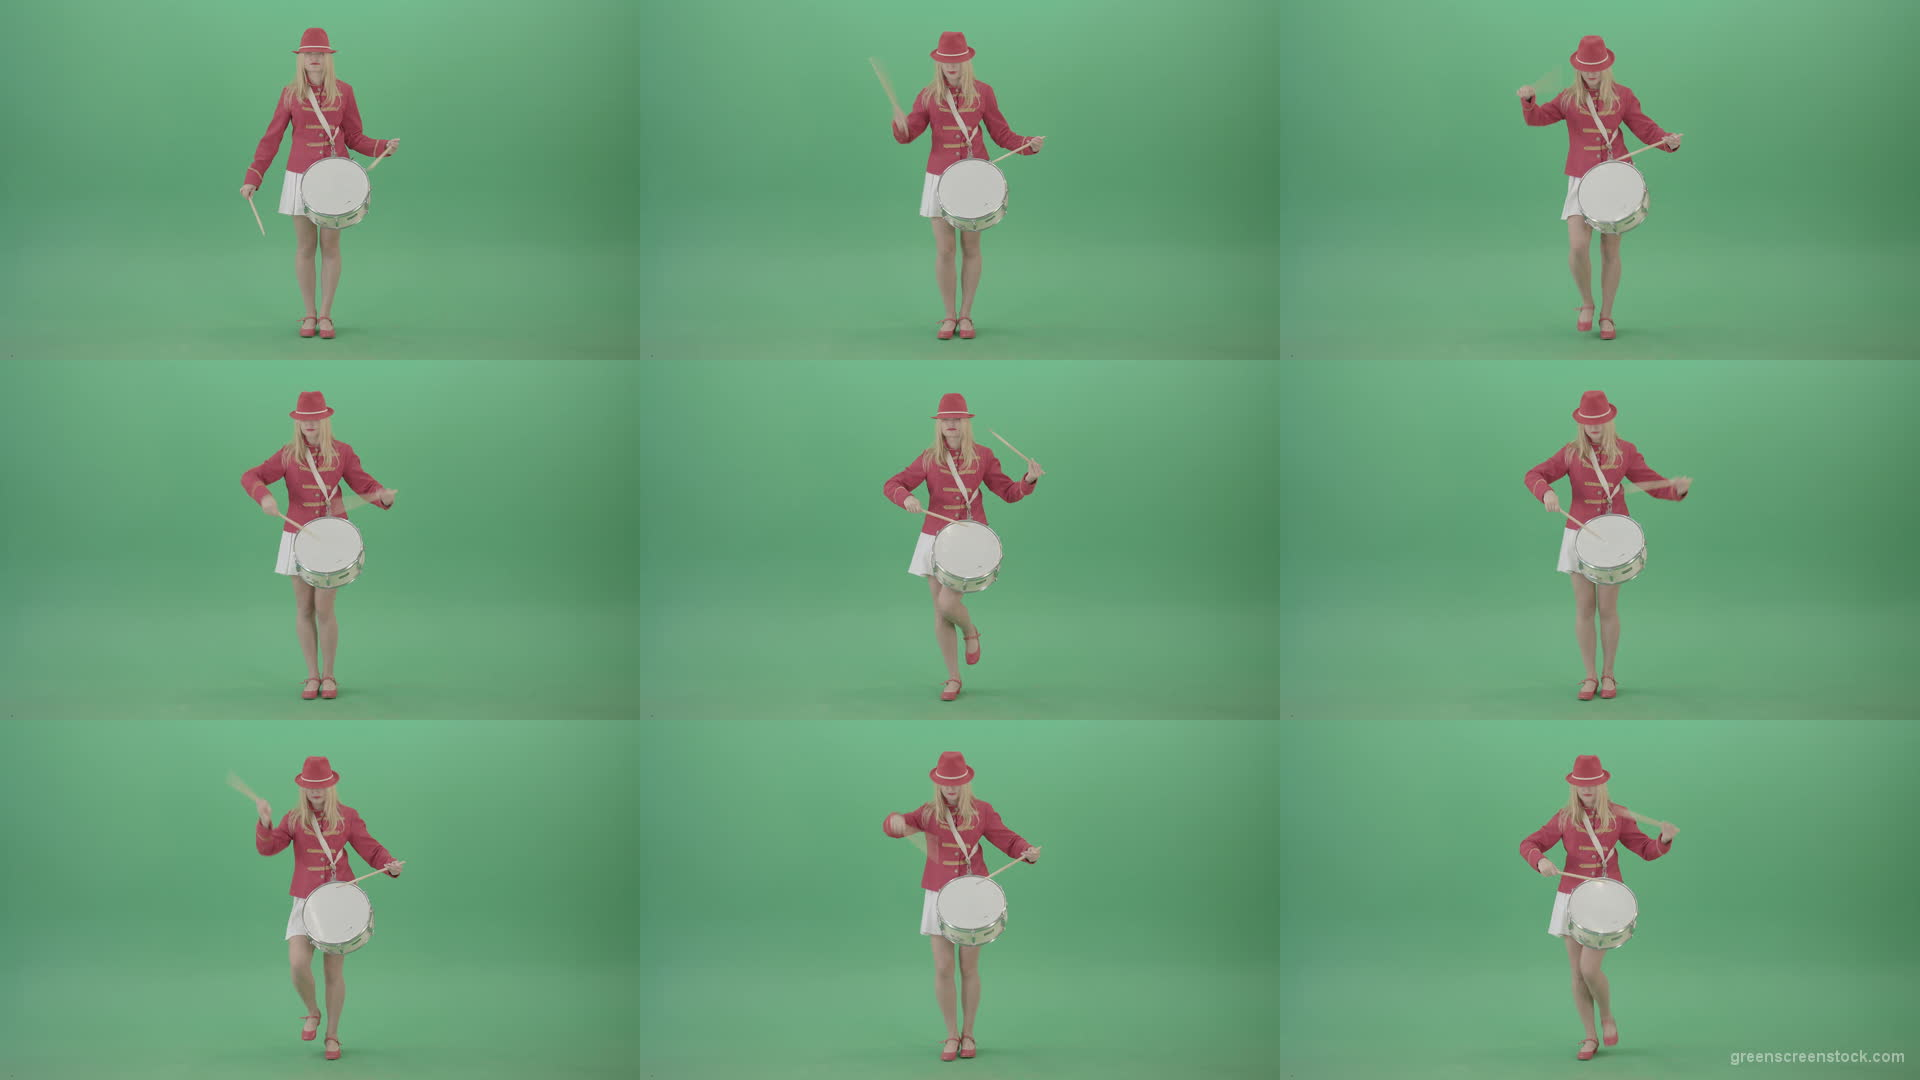 Girl-in-red-dress-marching-and-playing-drum-snare-music-instrument-over-green-screen-4K-Video-Footage-1920 Green Screen Stock